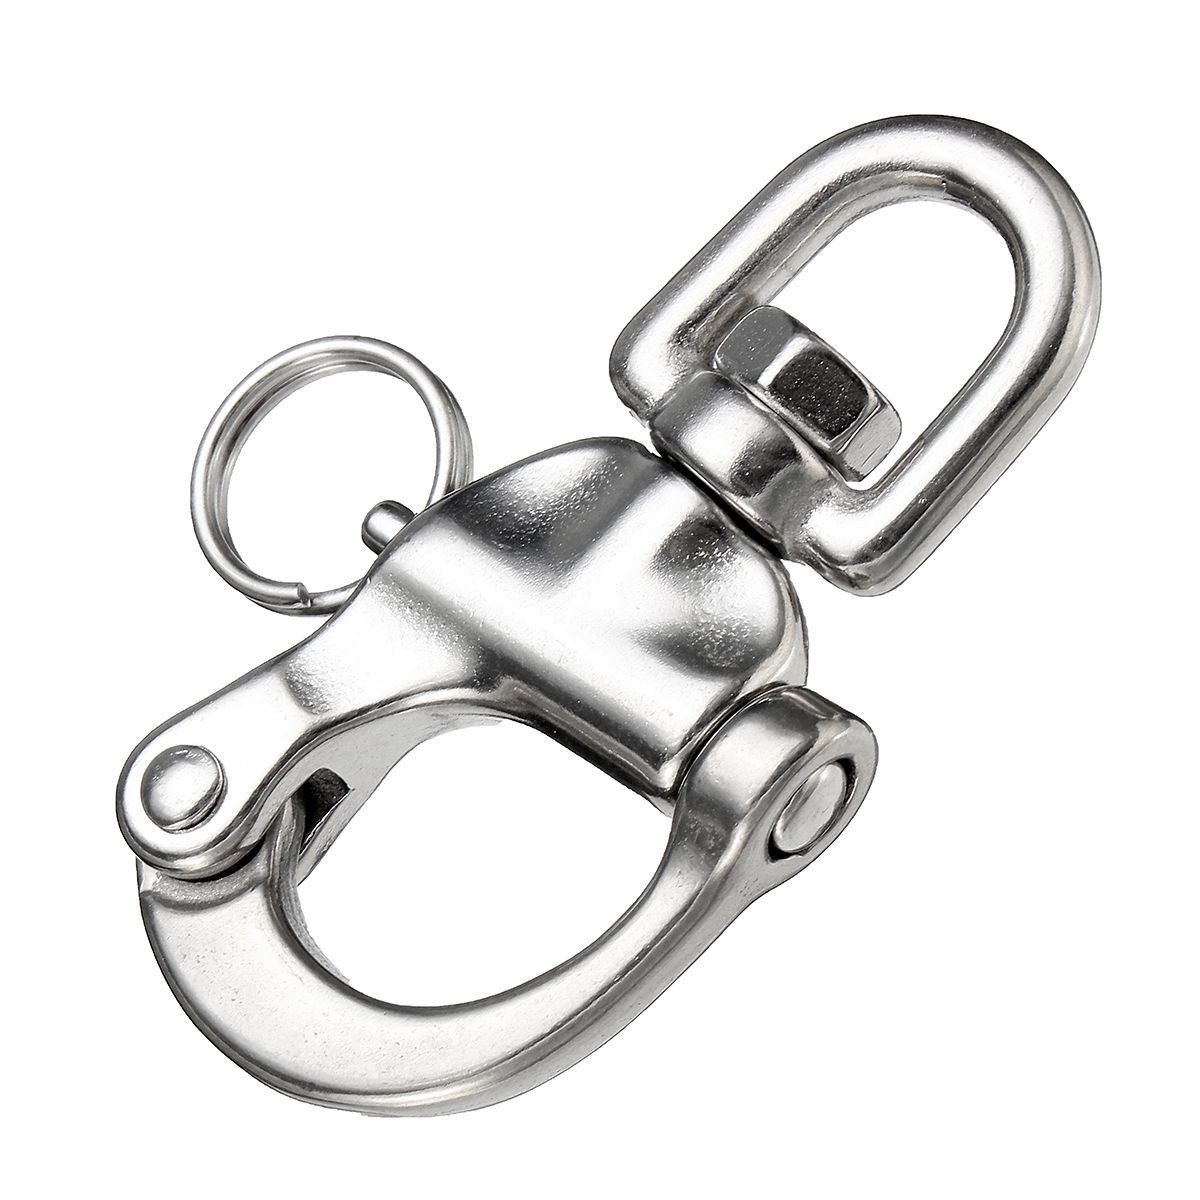 316-Stainless-Steel-Quick-Release-Boat-Anchor-Chain-Eye-Shackle-Swivel-Snap-Hook-1242278